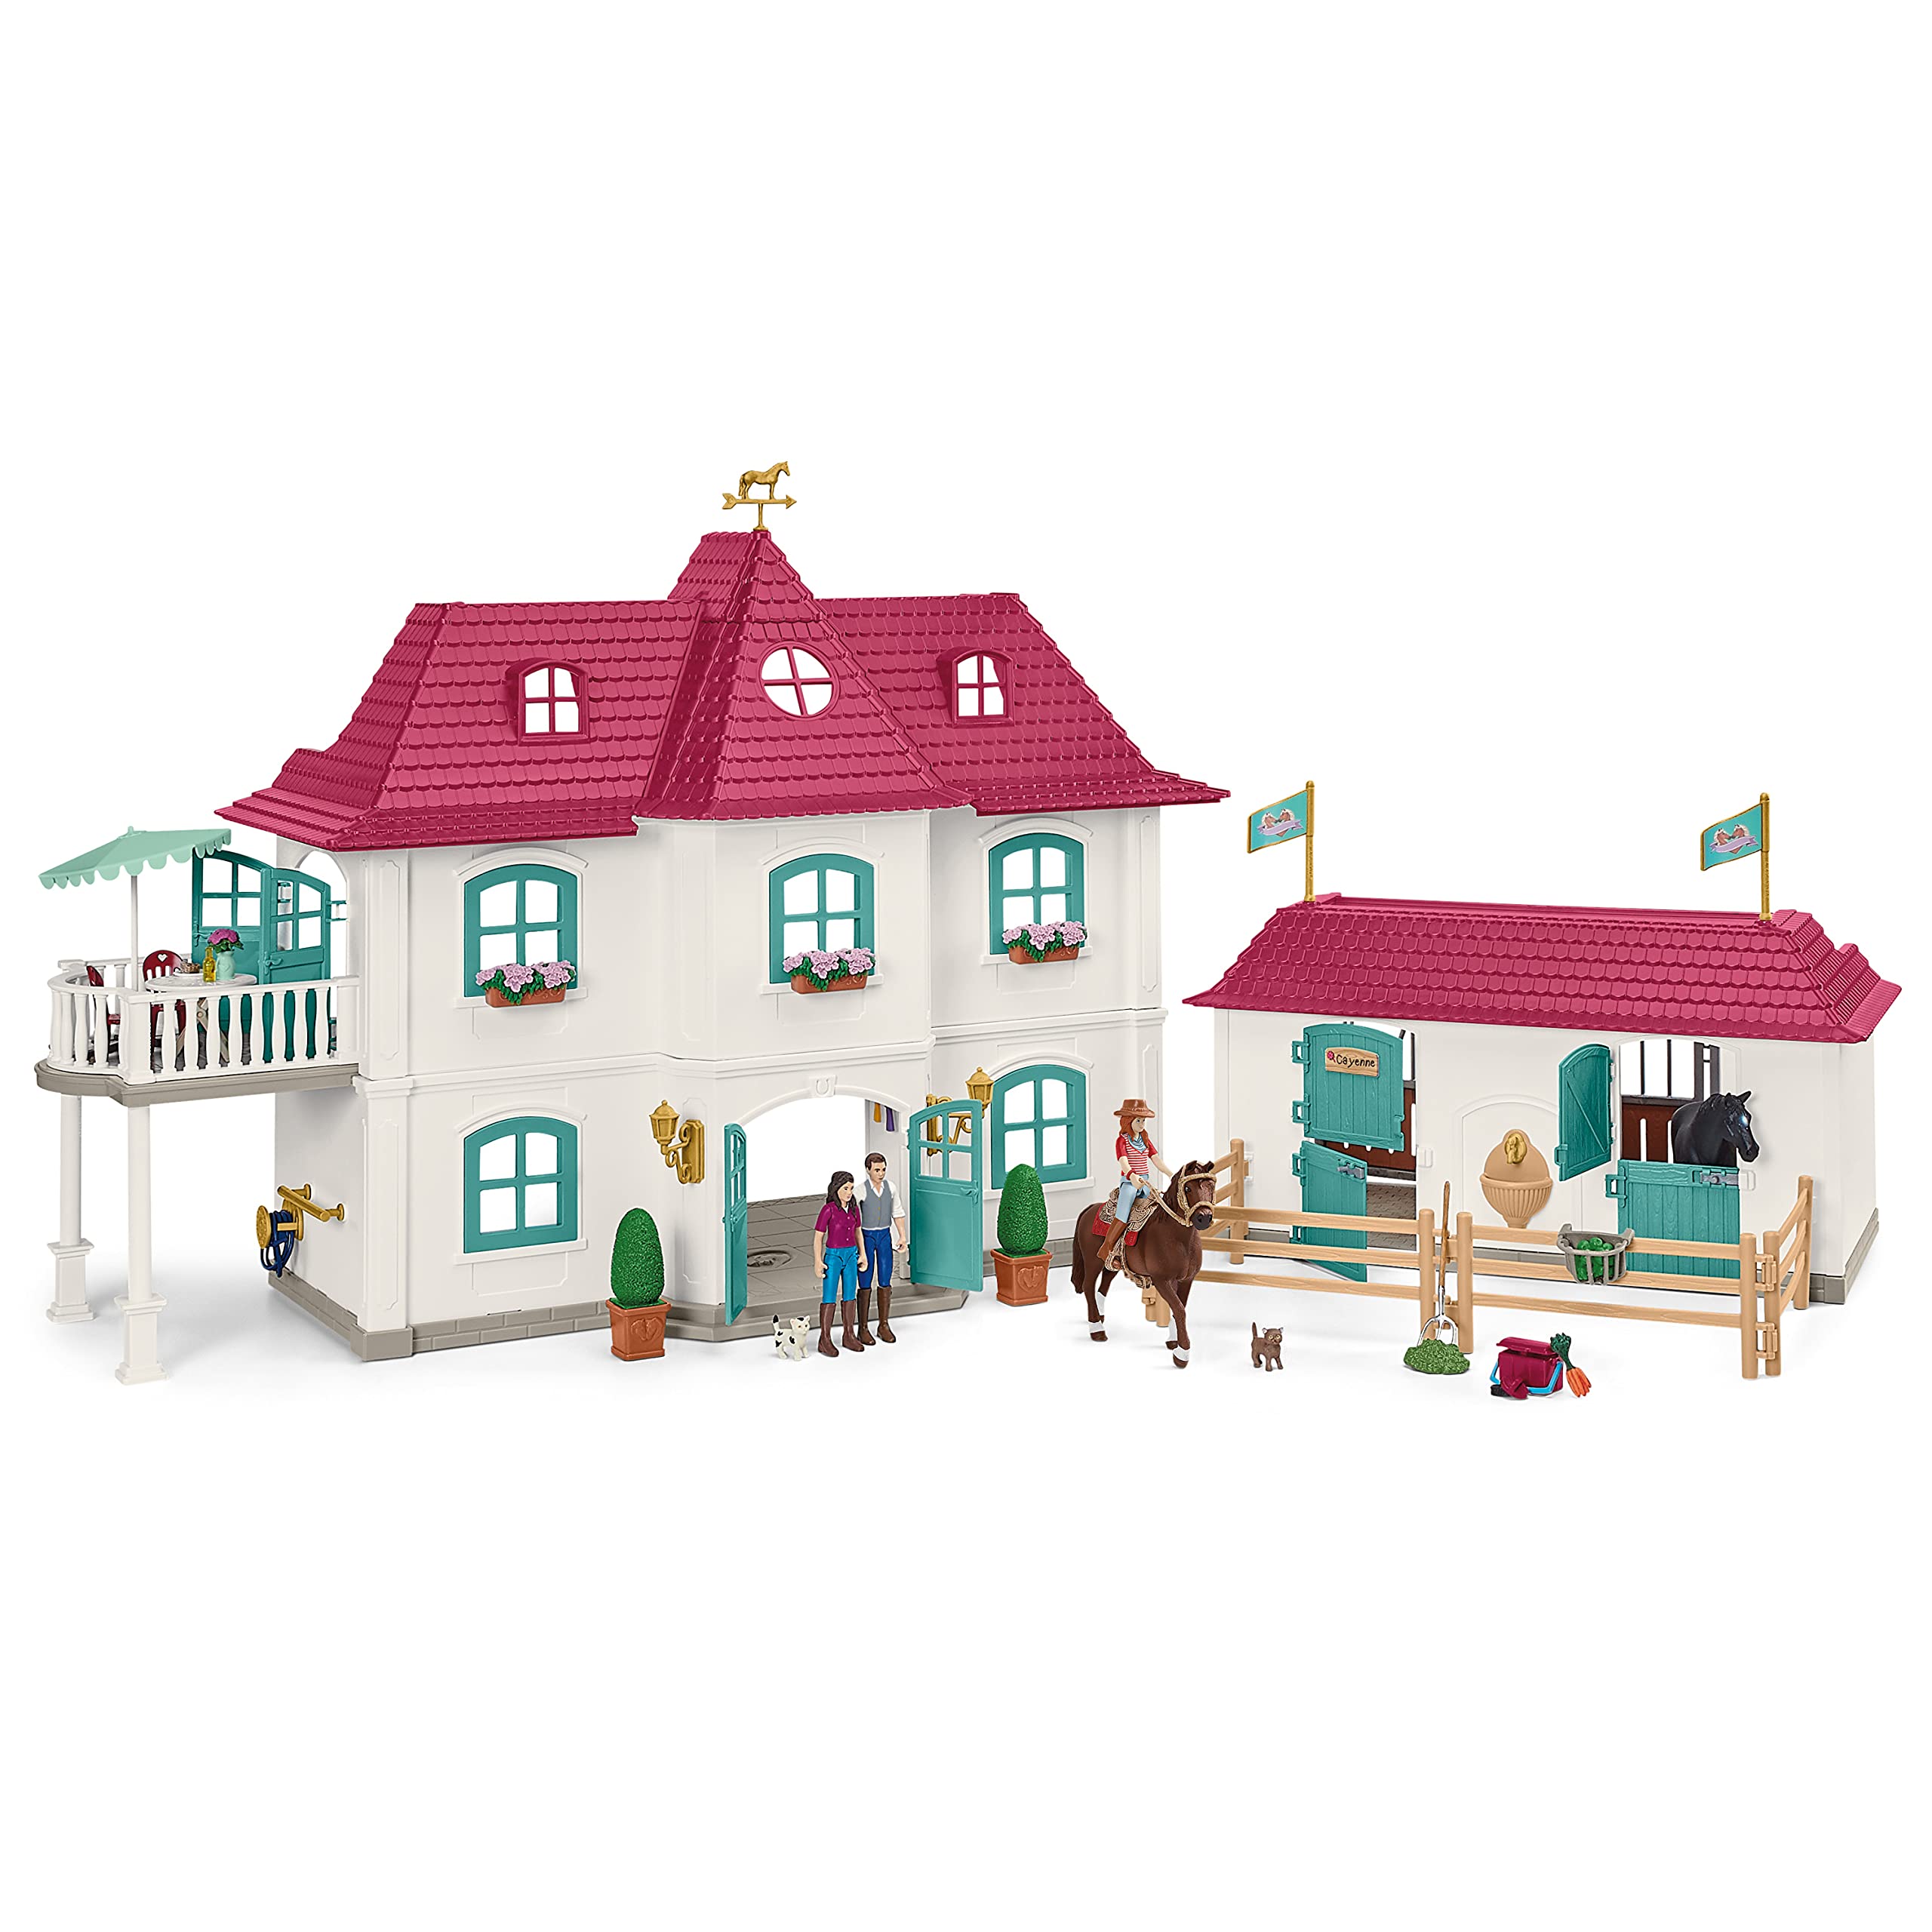 Schleich Horse Toys and Playsets, Award Winning 108 Piece Set Lakeside Country House, Horse Stable, Pony Figurines, Rider Action Figures, and Barn Accessories, for Girls and Boys Ages 5 and Above